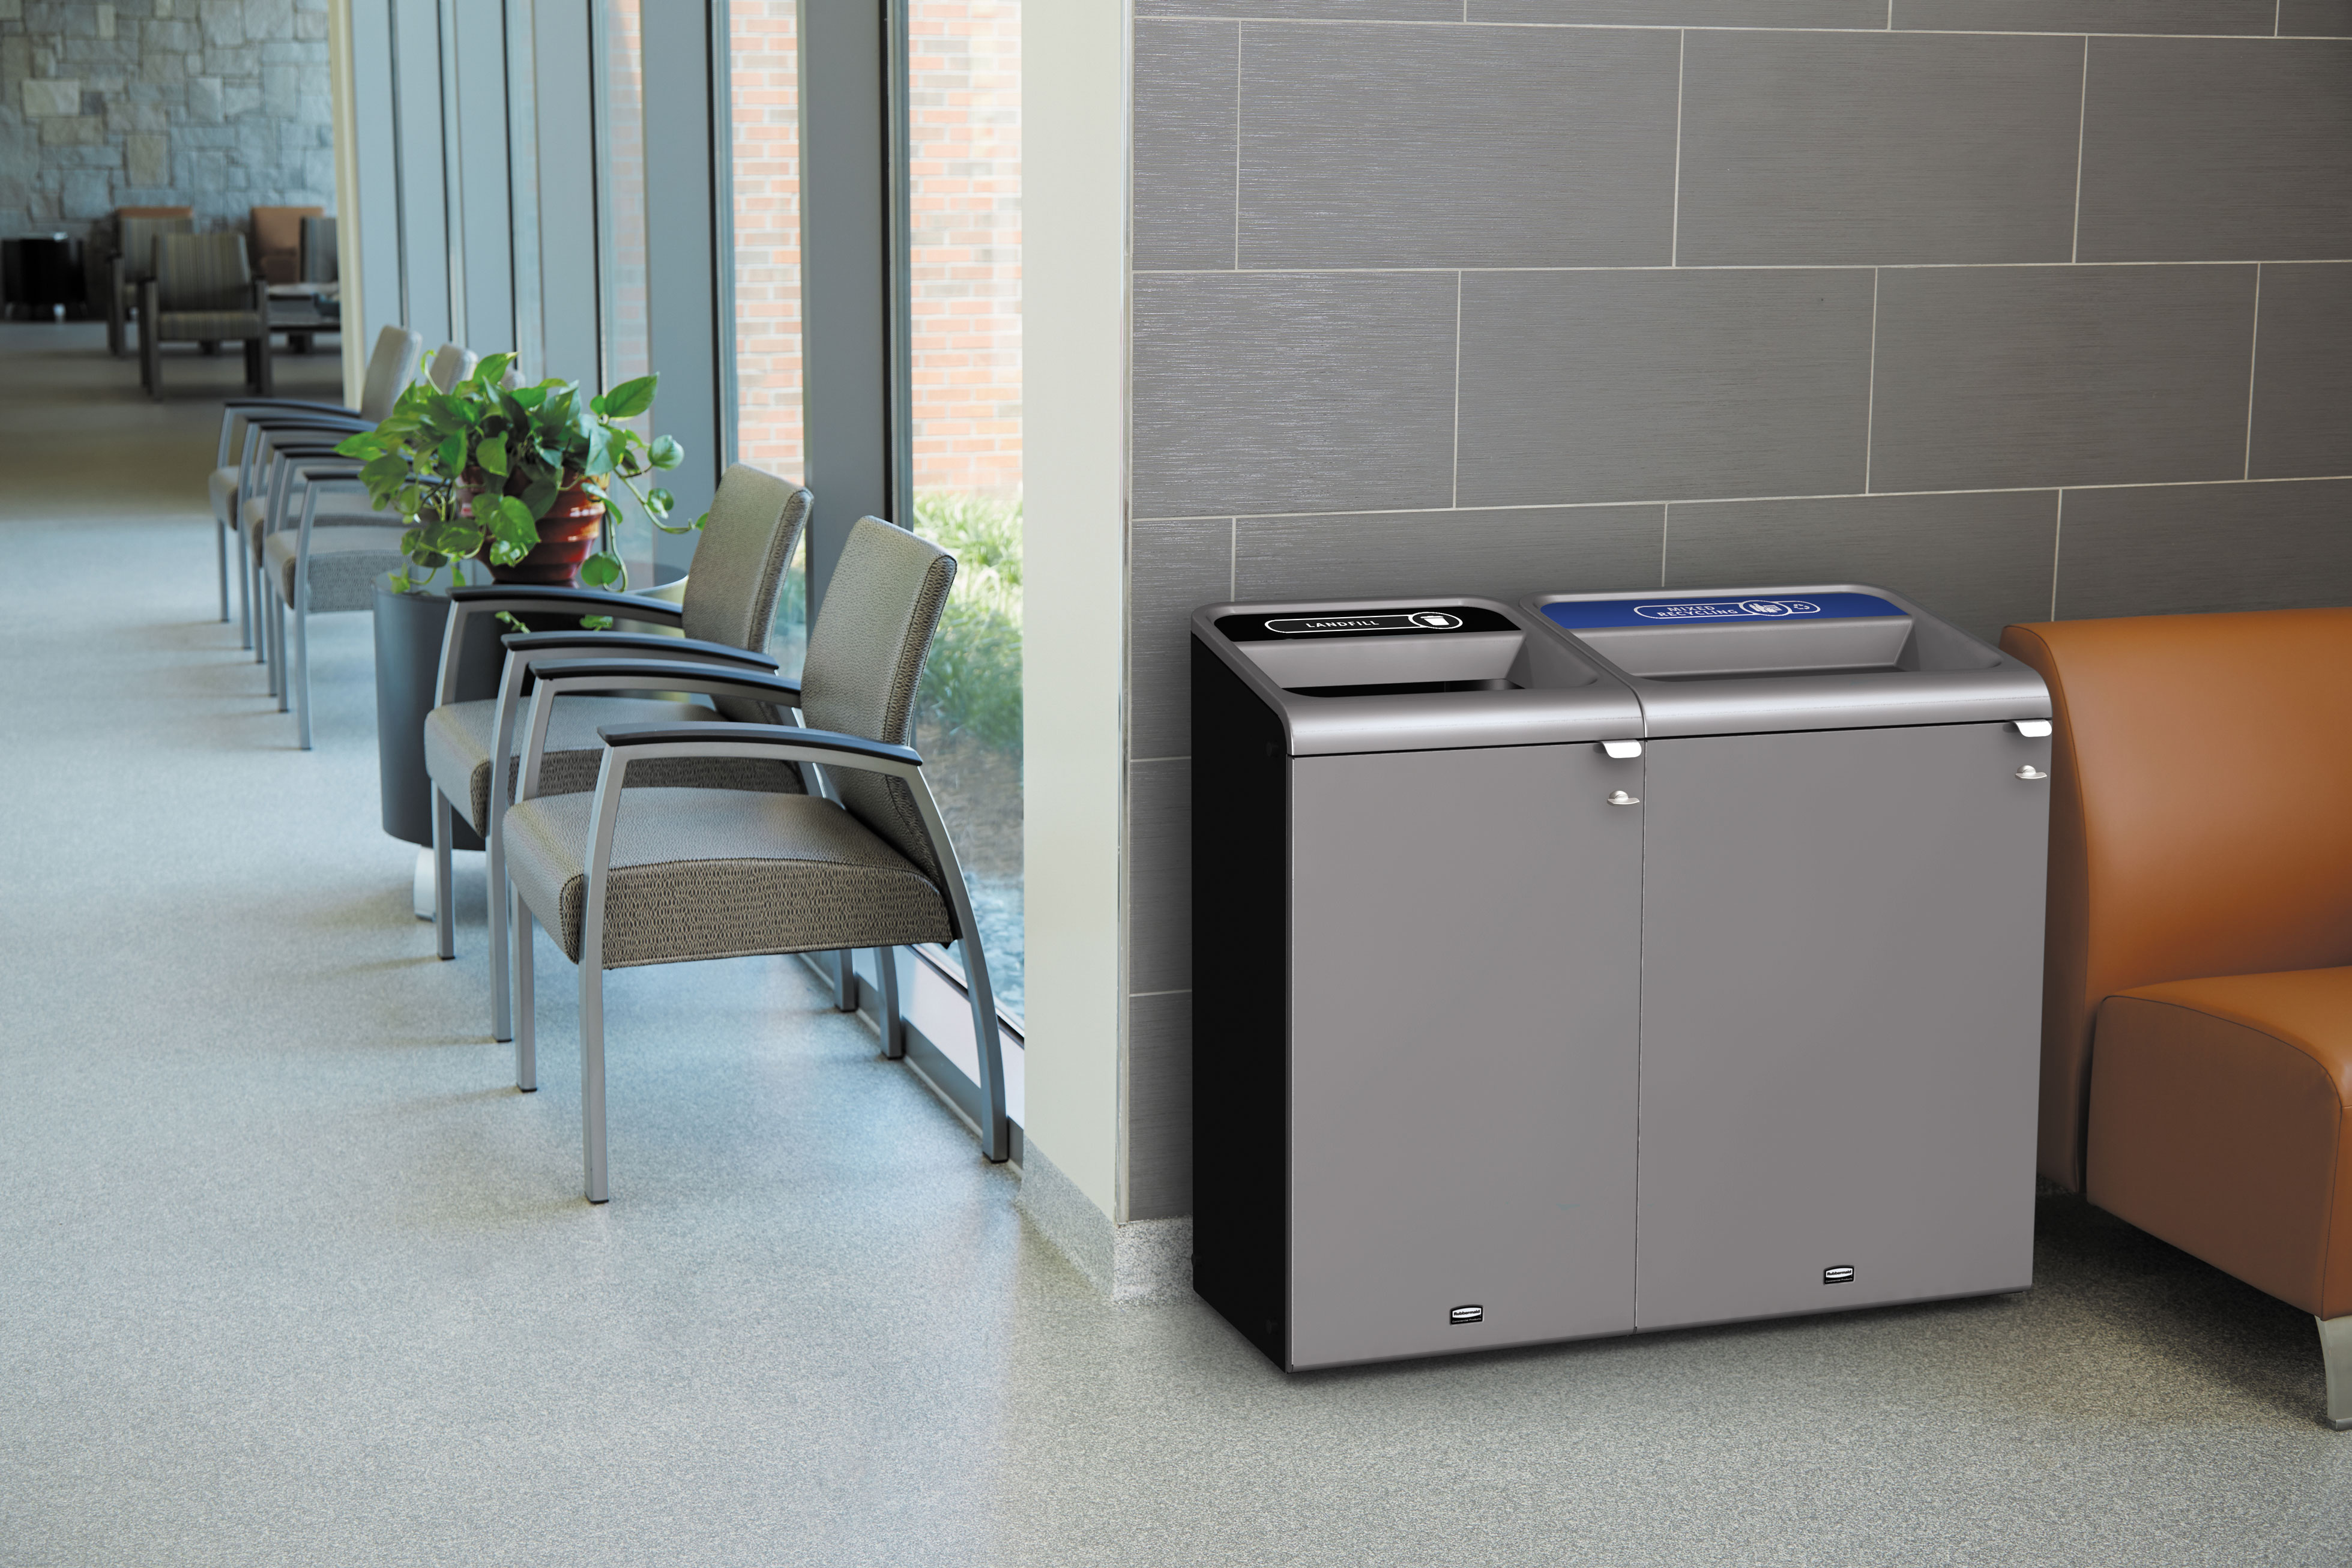 /media/5105/1961750-rcp-decorative-refuse-configure-basic-indoor-2-stream-gray-stenni-15gal-and-23gal-waiting-area-in-use.jpg